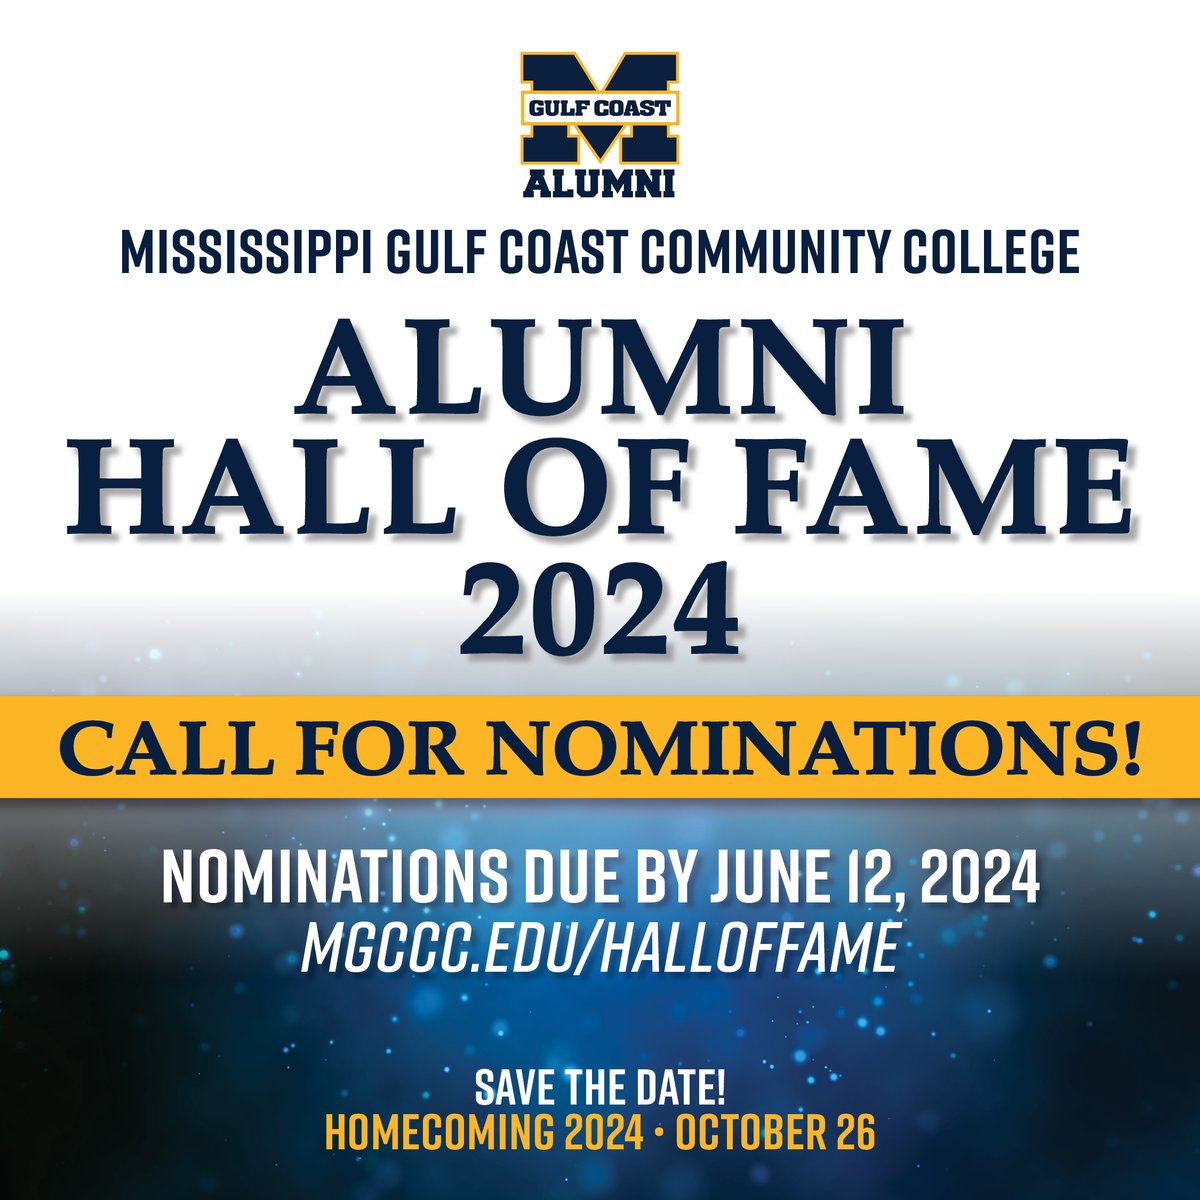 Take a moment to nominate a deserving Gulf Coast alum today at mgccc.edu/halloffame! For more information, please contact Tharessa Williams at 601.928.6344 or tharessa.williams@mgccc.edu